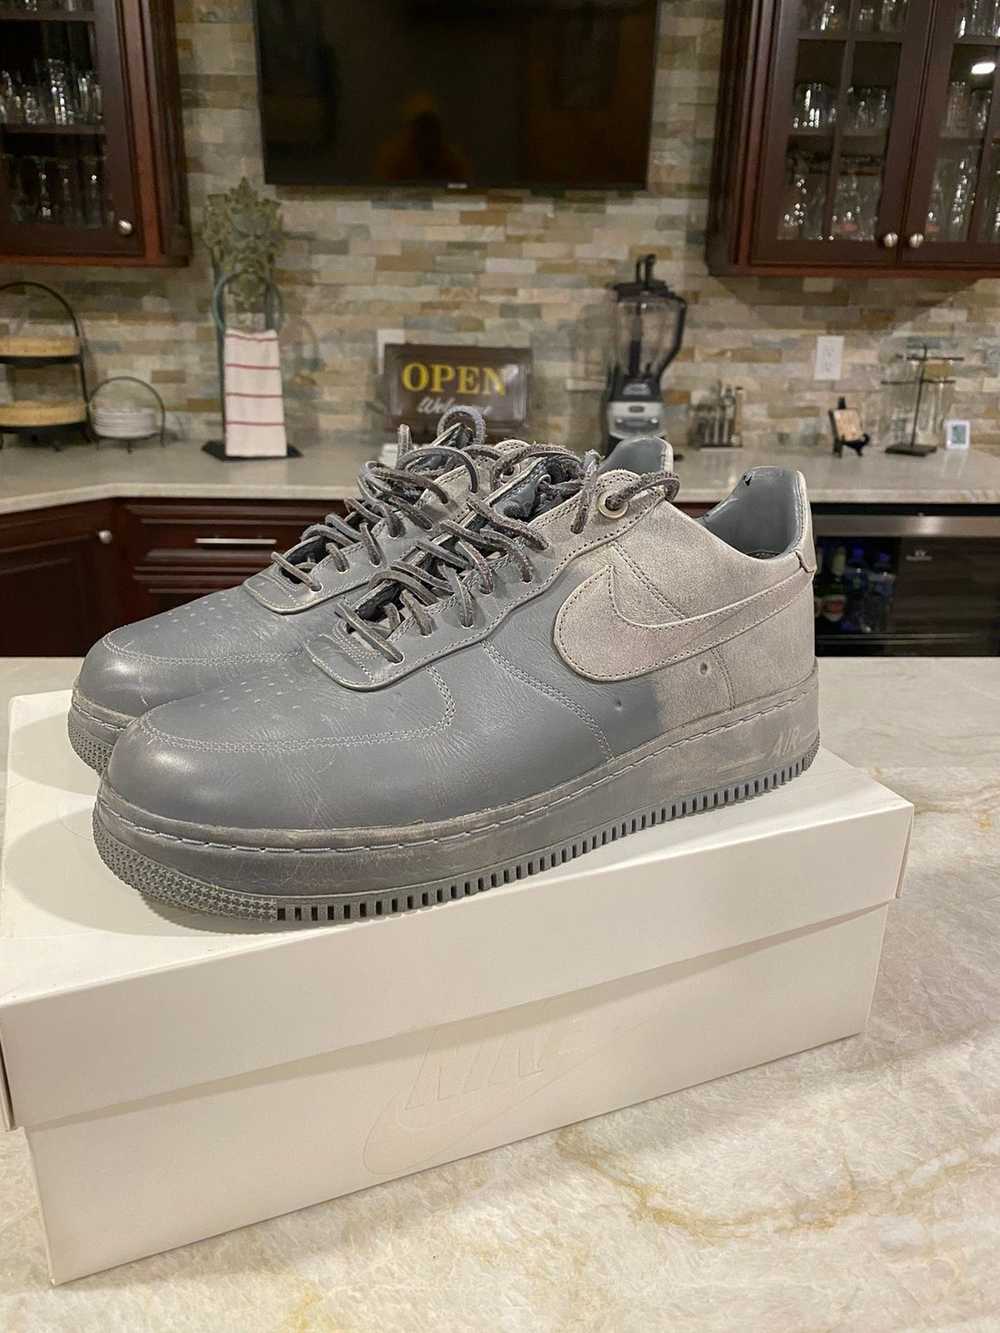 Nike × Pigalle Nike x Pigalle Air Force 1 LW CMFT - image 3